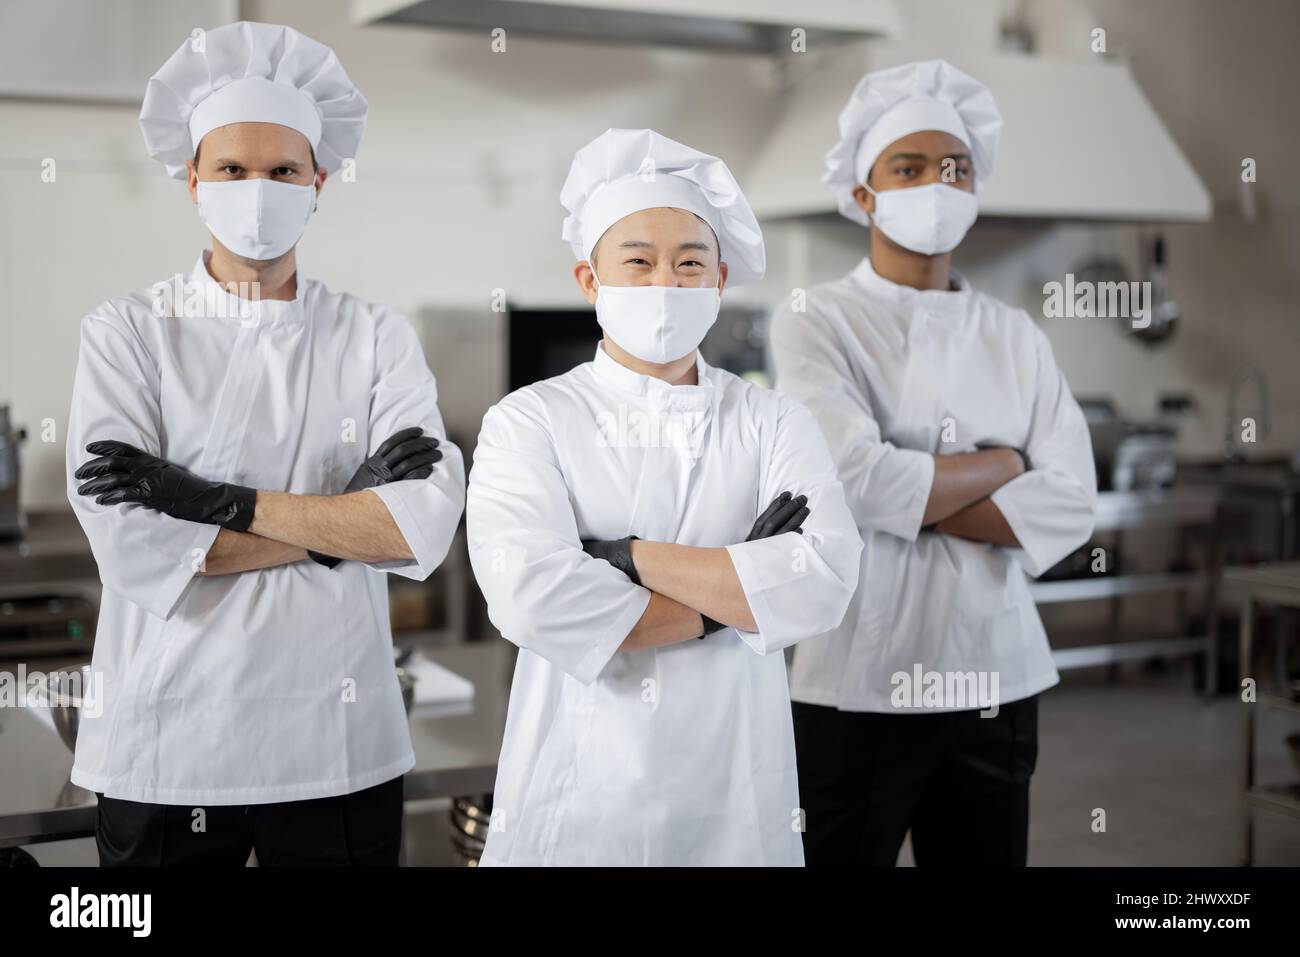 https://c8.alamy.com/comp/2HWXXDF/portrait-of-multiracial-team-of-three-chefs-standing-together-in-the-professional-kitchen-well-dressed-chefs-in-face-masks-and-protective-gloves-ready-for-a-job-new-normal-for-business-during-pandemic-2HWXXDF.jpg